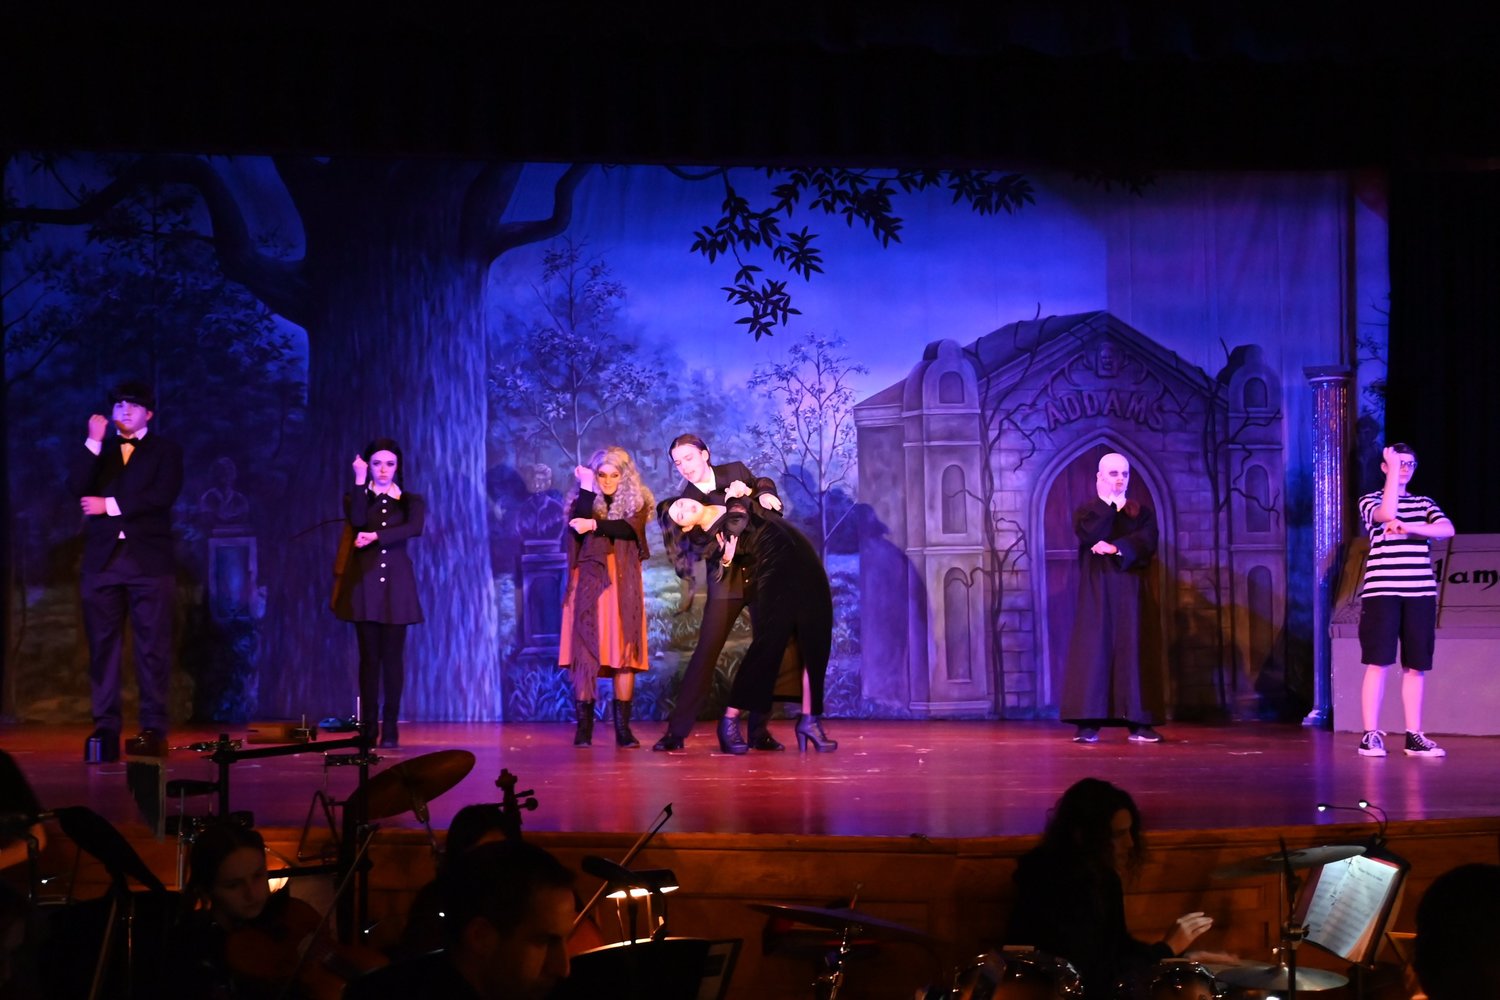 Ava Lithgow as Morticia and Patrick O’Neill as Gomez doing the Tango as other members of The Addams Family watched.